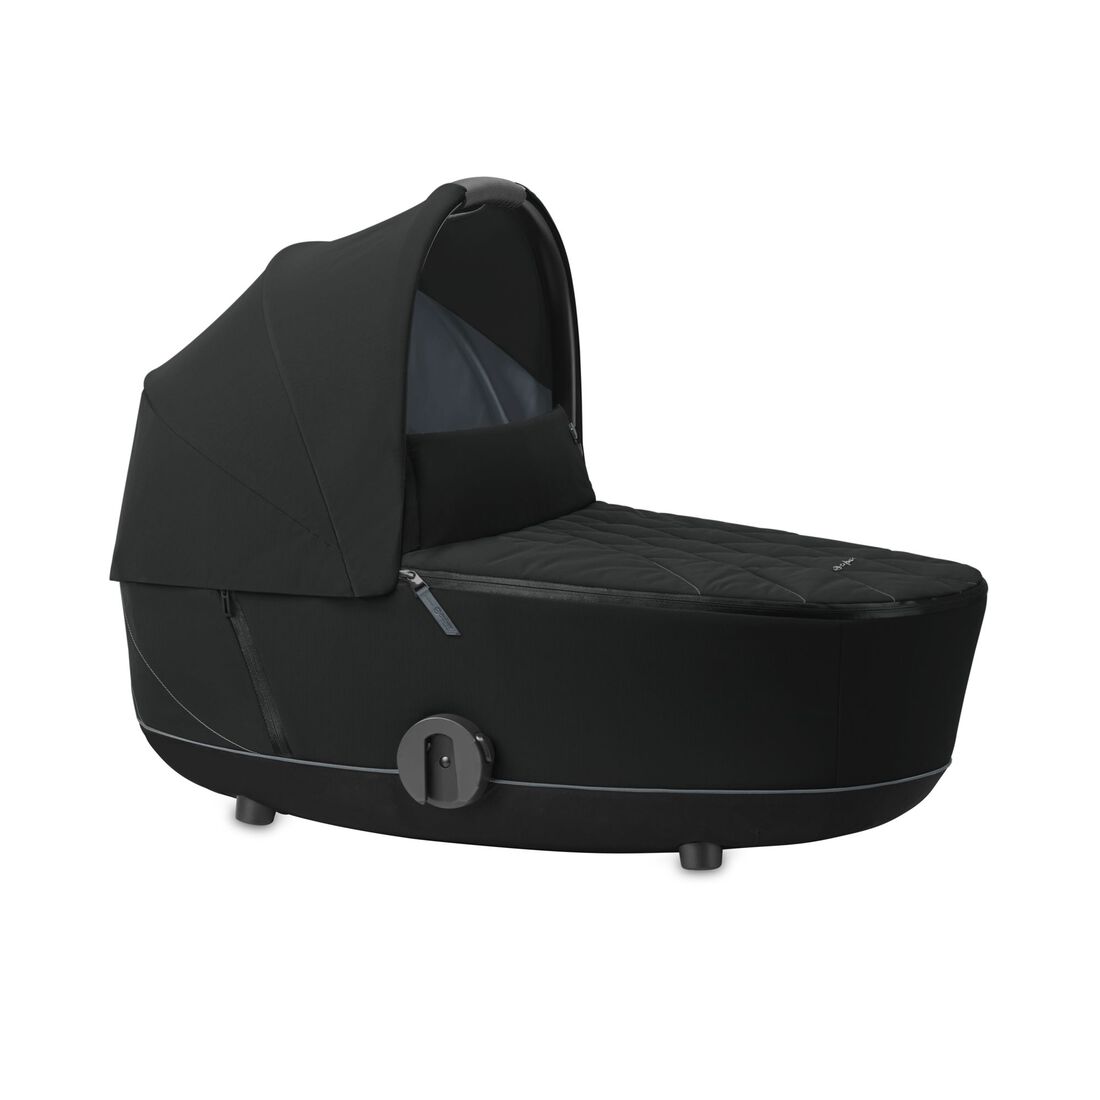 CYBEX Mios Lux Carry Cot - Deep Black in Deep Black large